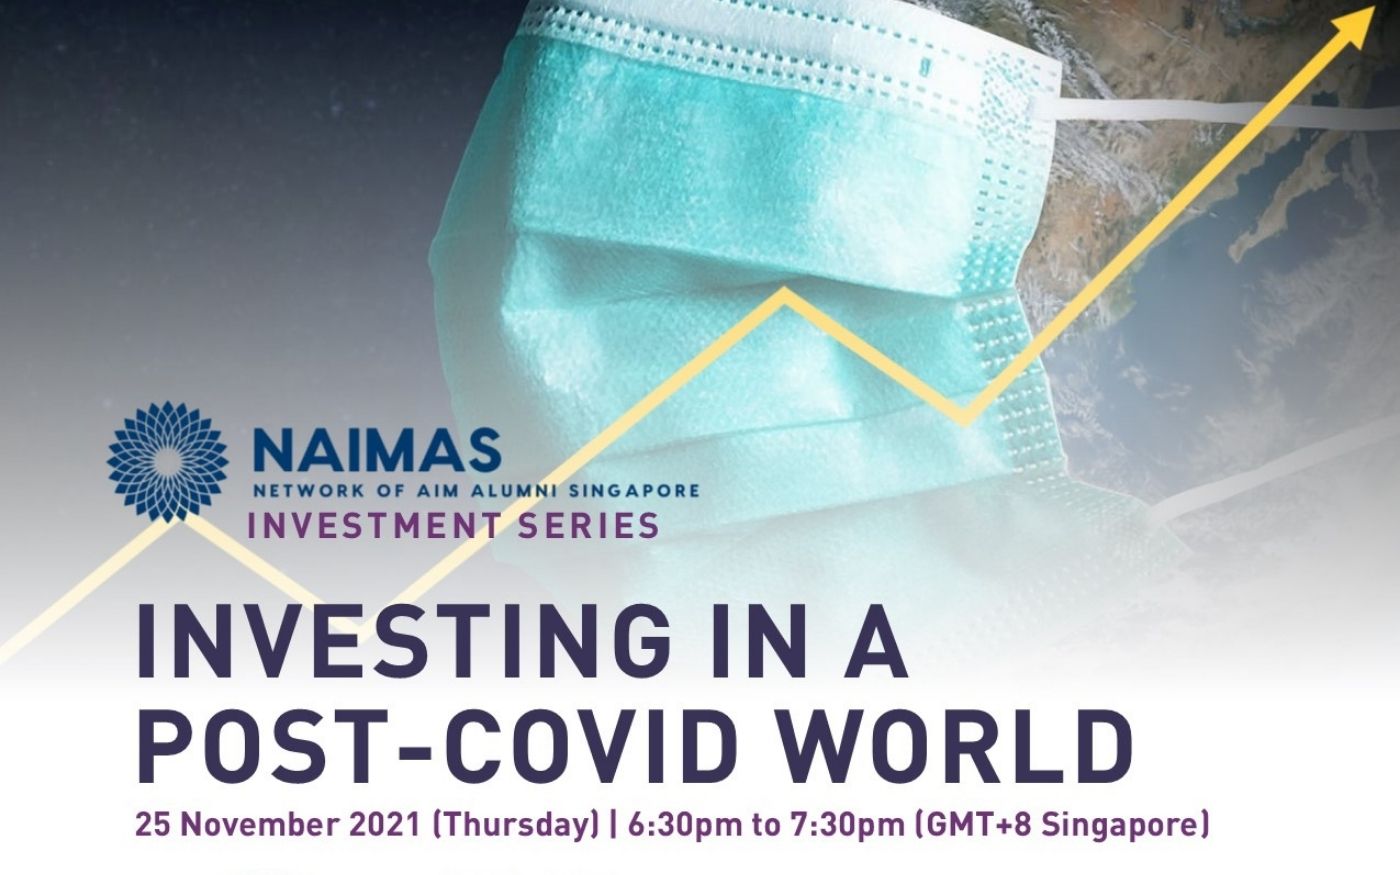 NAIMAS Investment Series: Investing in a Post-Covid World